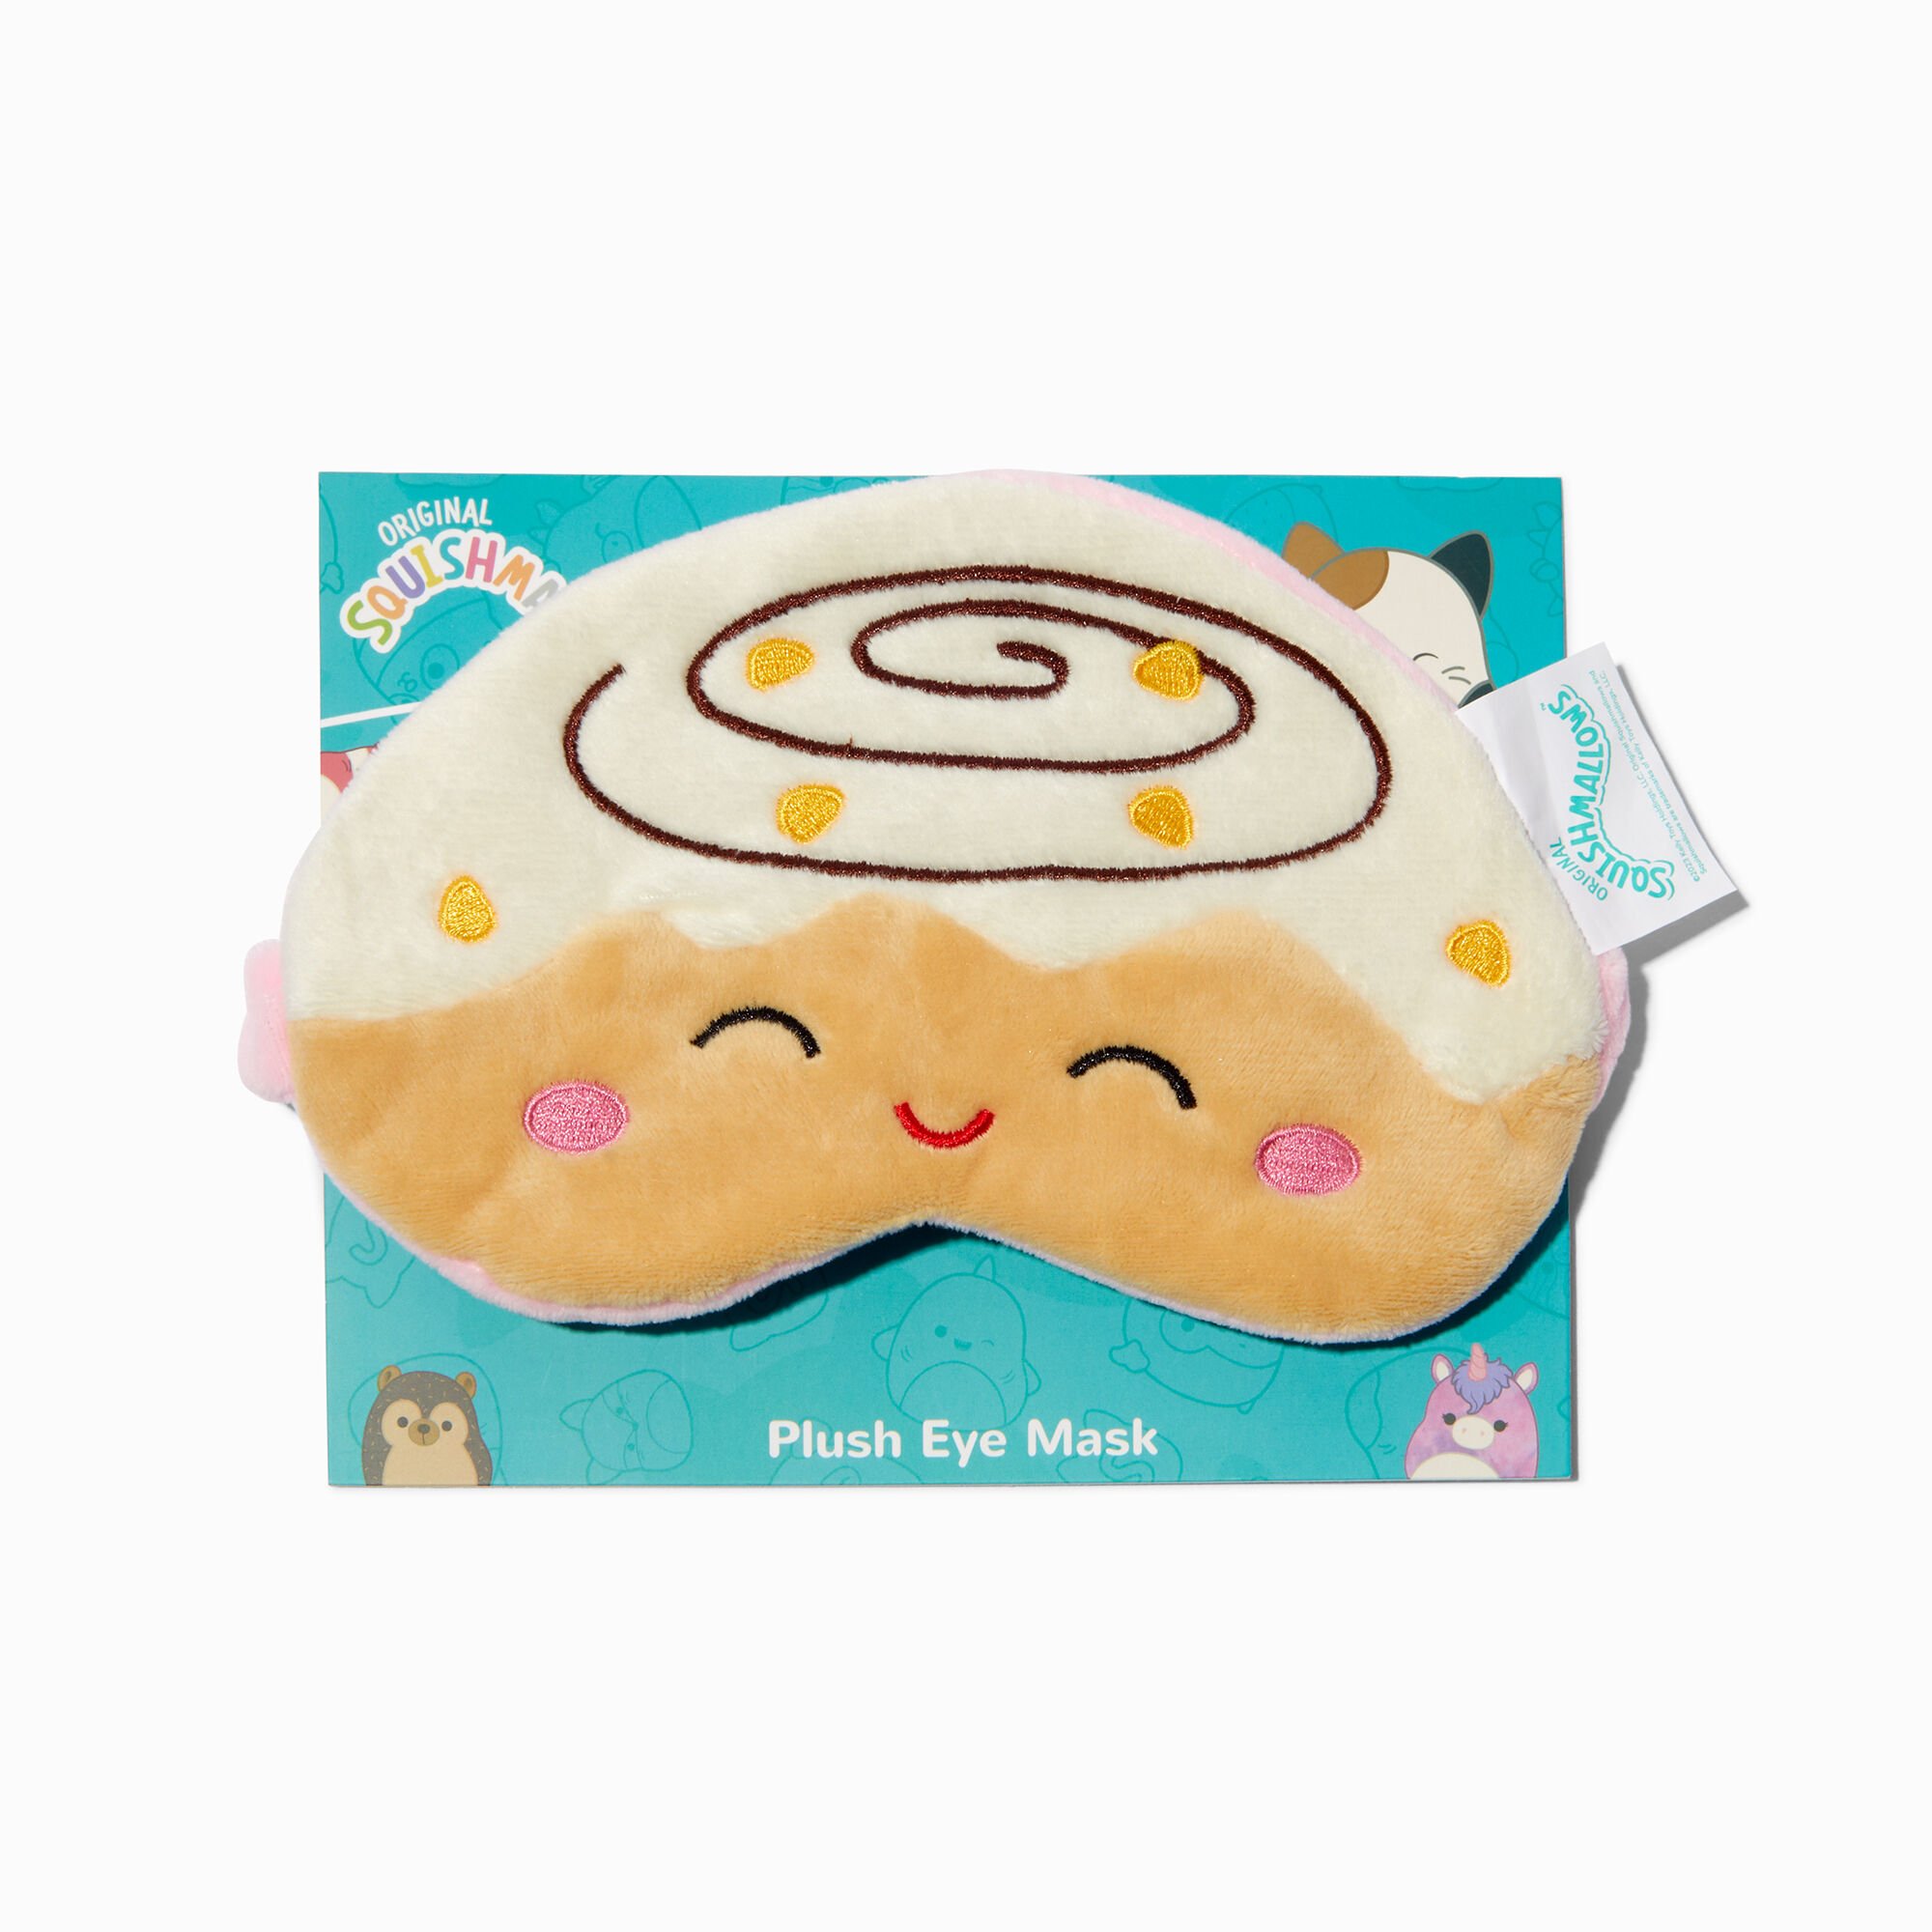 View Claires Squishmallows Cinnamon Roll Plush Sleeping Mask information